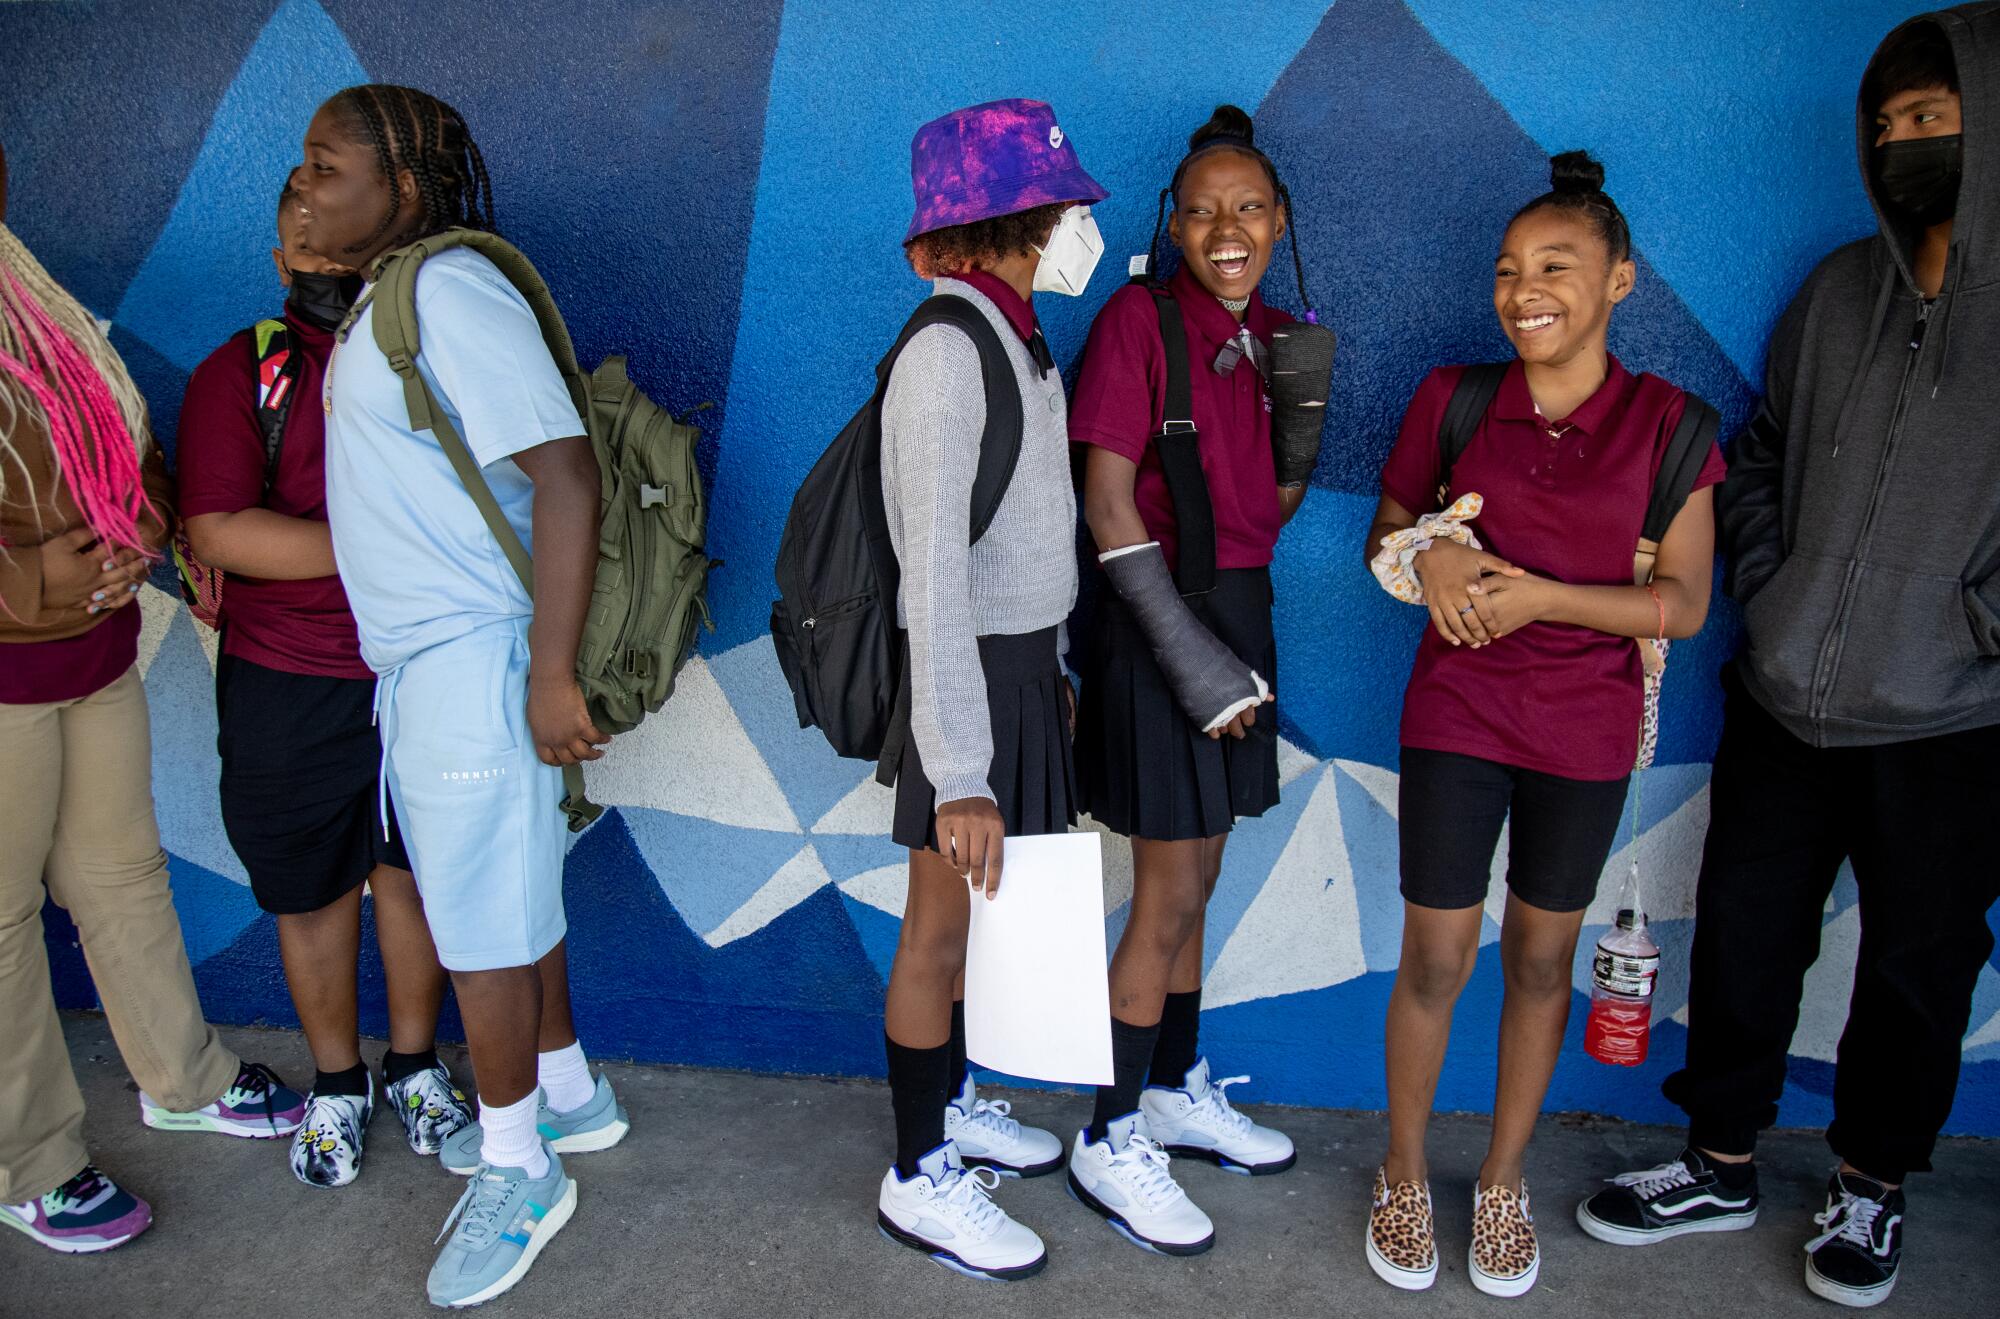 La'Veyah Mosley, 12, middle, shares a laugh with her twin sister La'Niyah and other classmates 